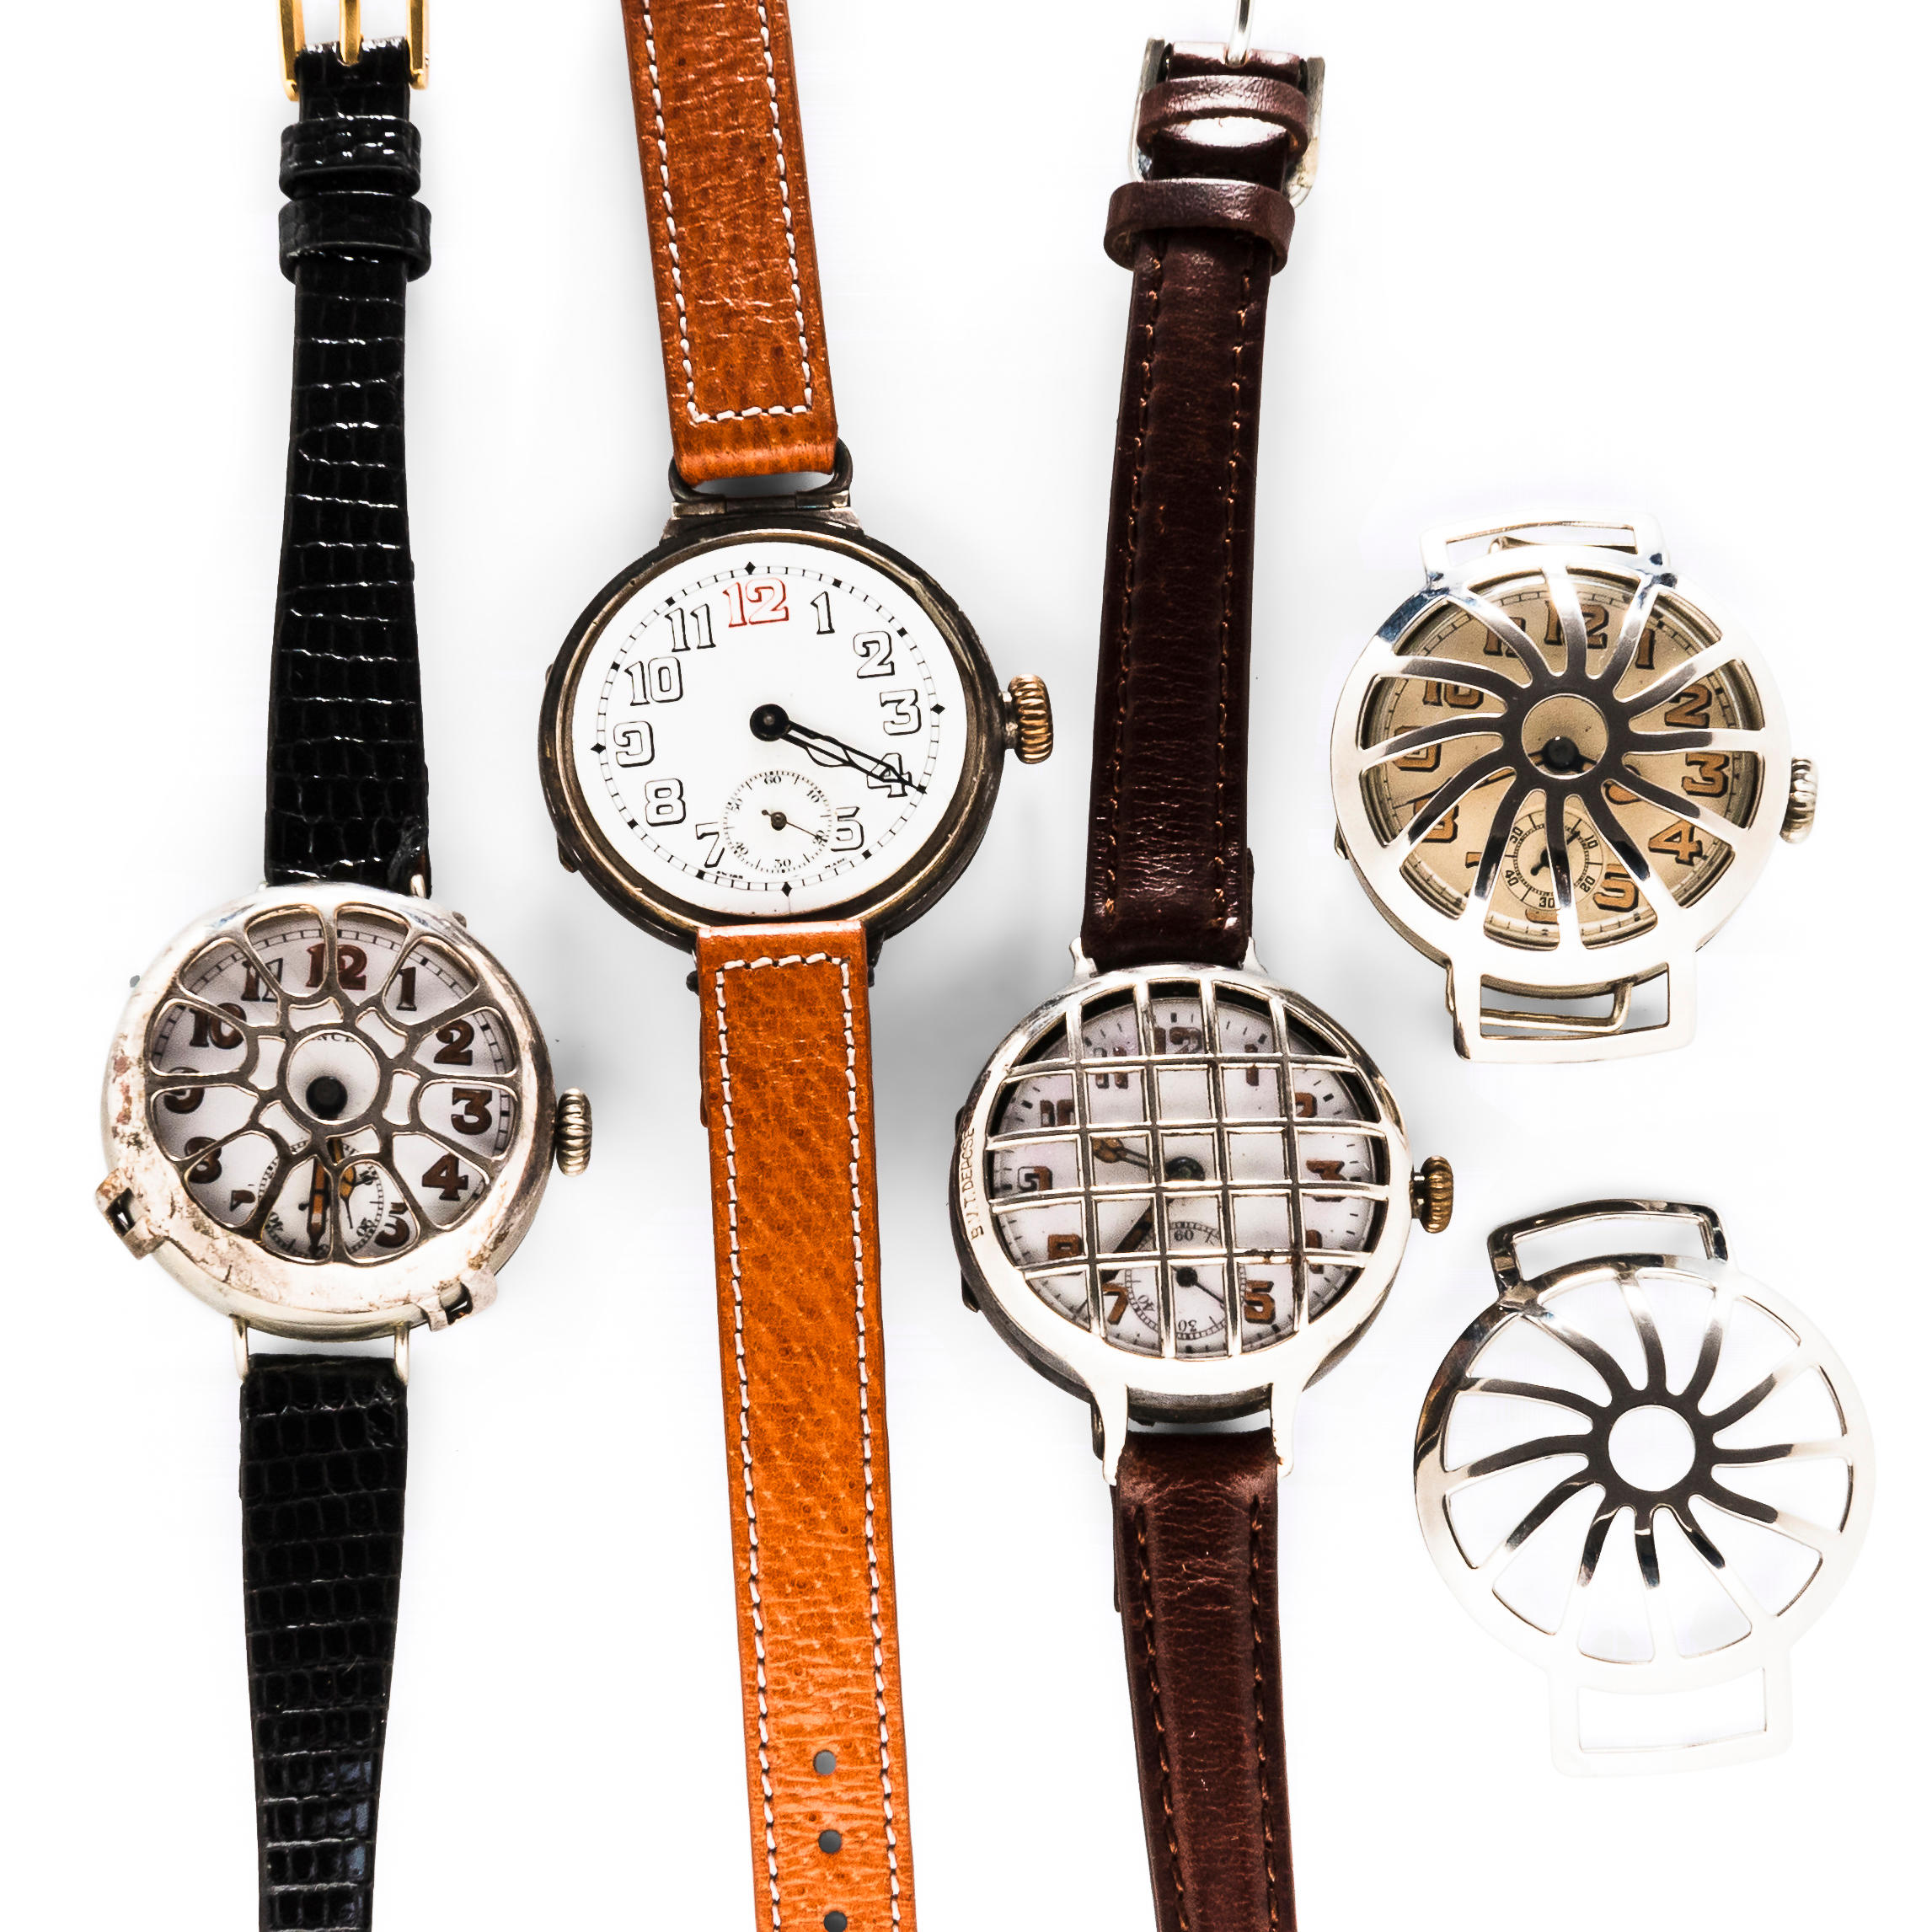 FOUR VINATAGE TRENCH WATCHES all